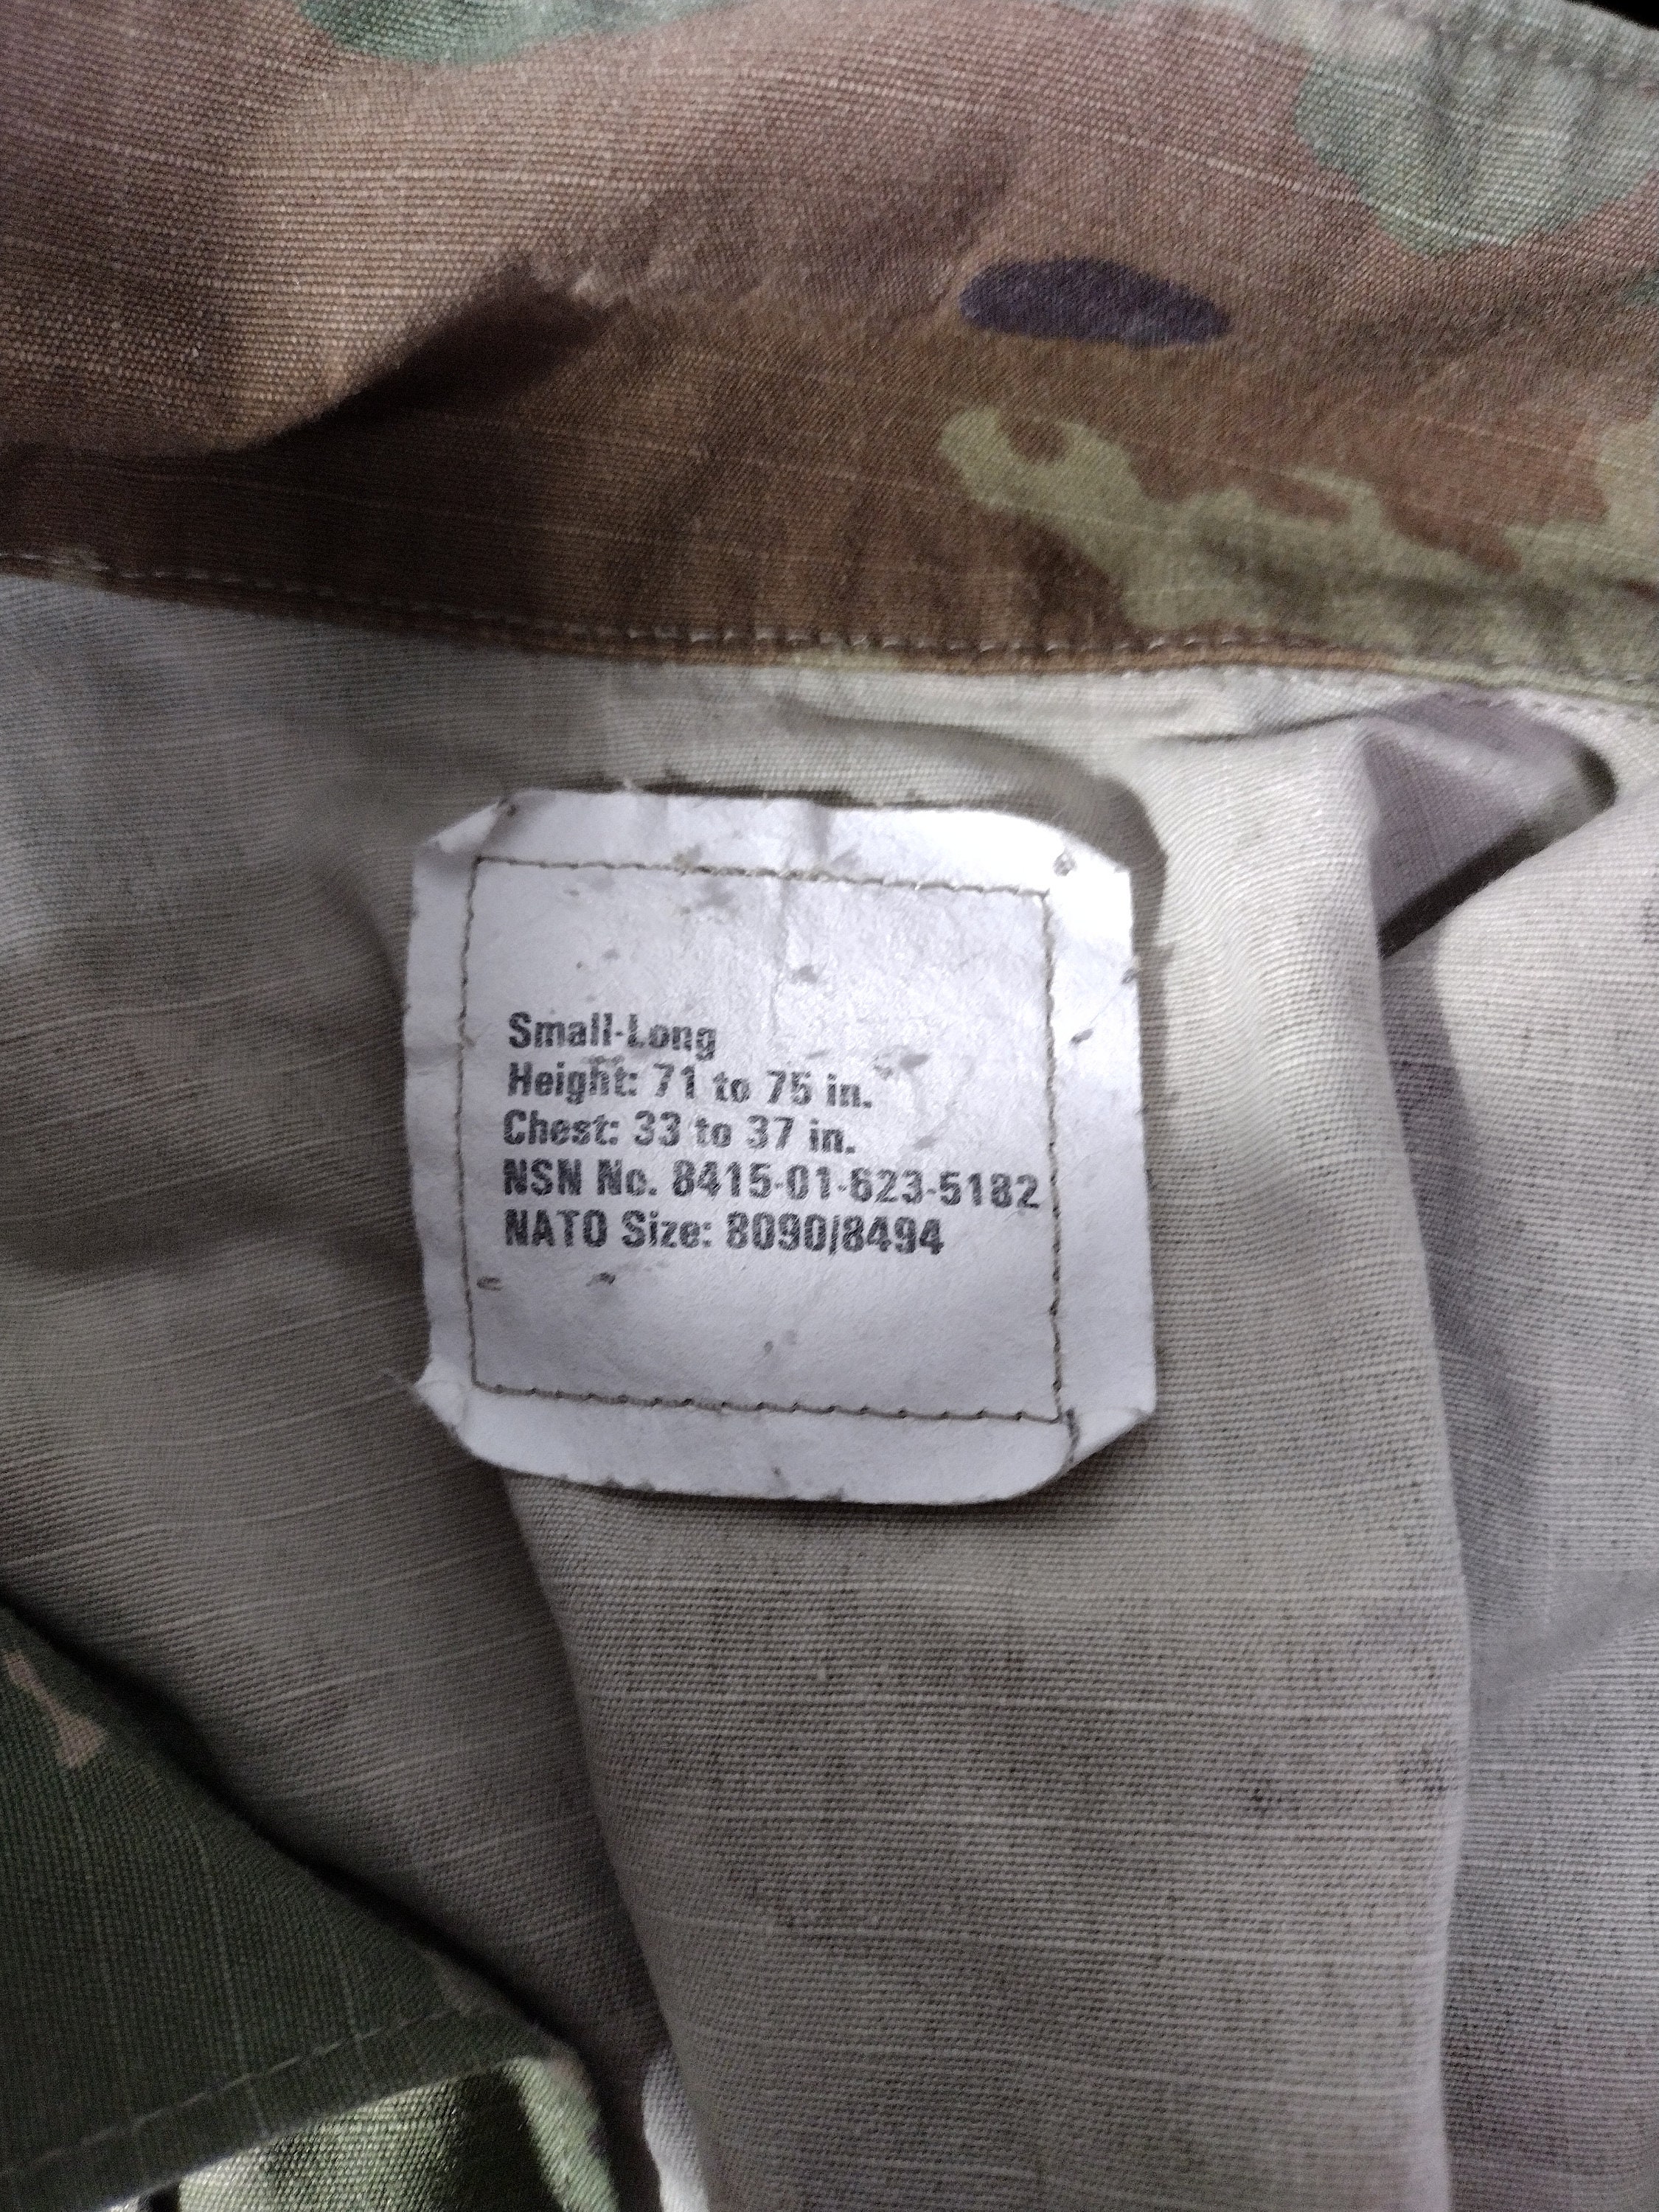 US Army Multicam Insect Repelling Combat Jacket - Etsy